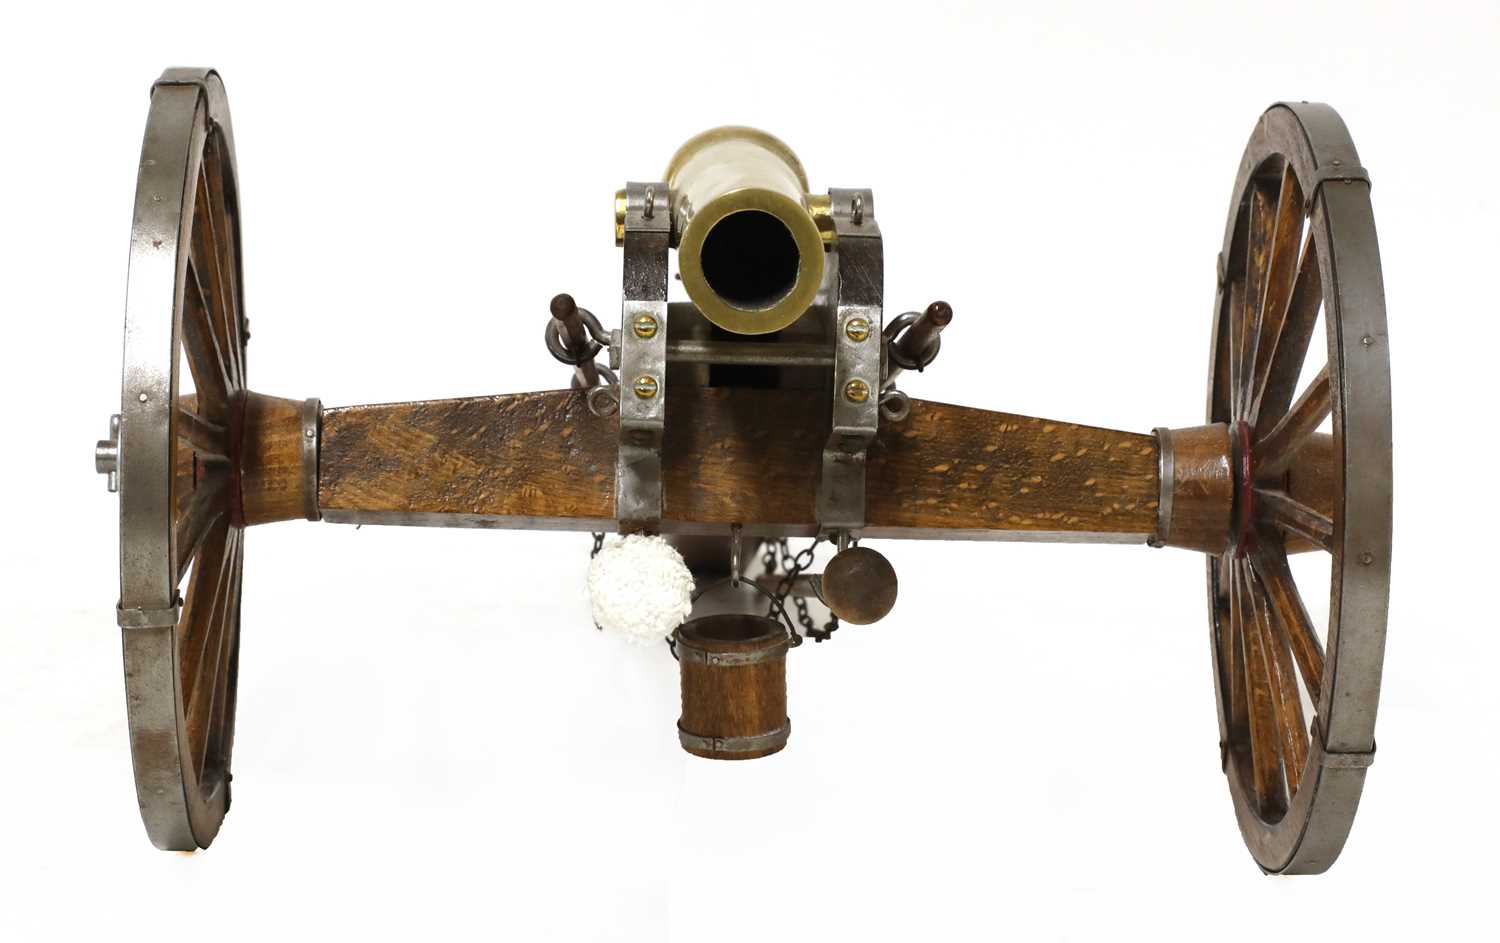 A model of an American Civil War field cannon, - Image 4 of 6